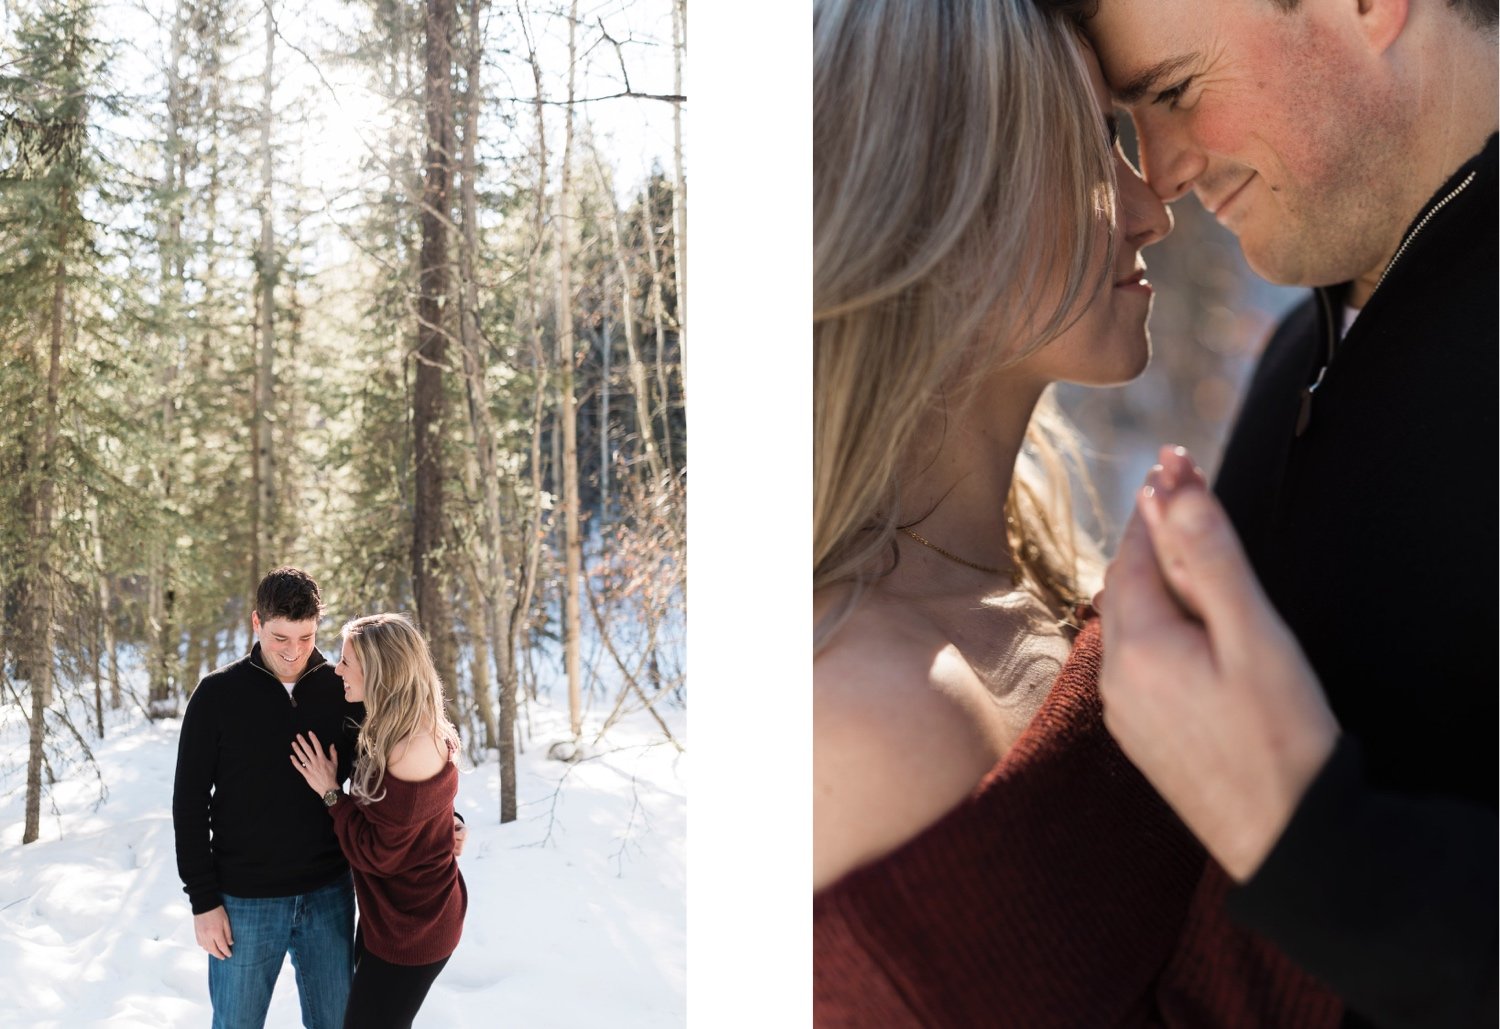 11_sunlight_landscape_Kananaskis_Canmore_Banff_trees_couple_engagement_close_simple_dog_cuddle_kiss_golden_hour_intimate_nature_mountains_fiancee_spring_winter_delicate_ice_bride_snow_soft_Calgary_Alberta_photographer_forest_groom_outdoor.jpg